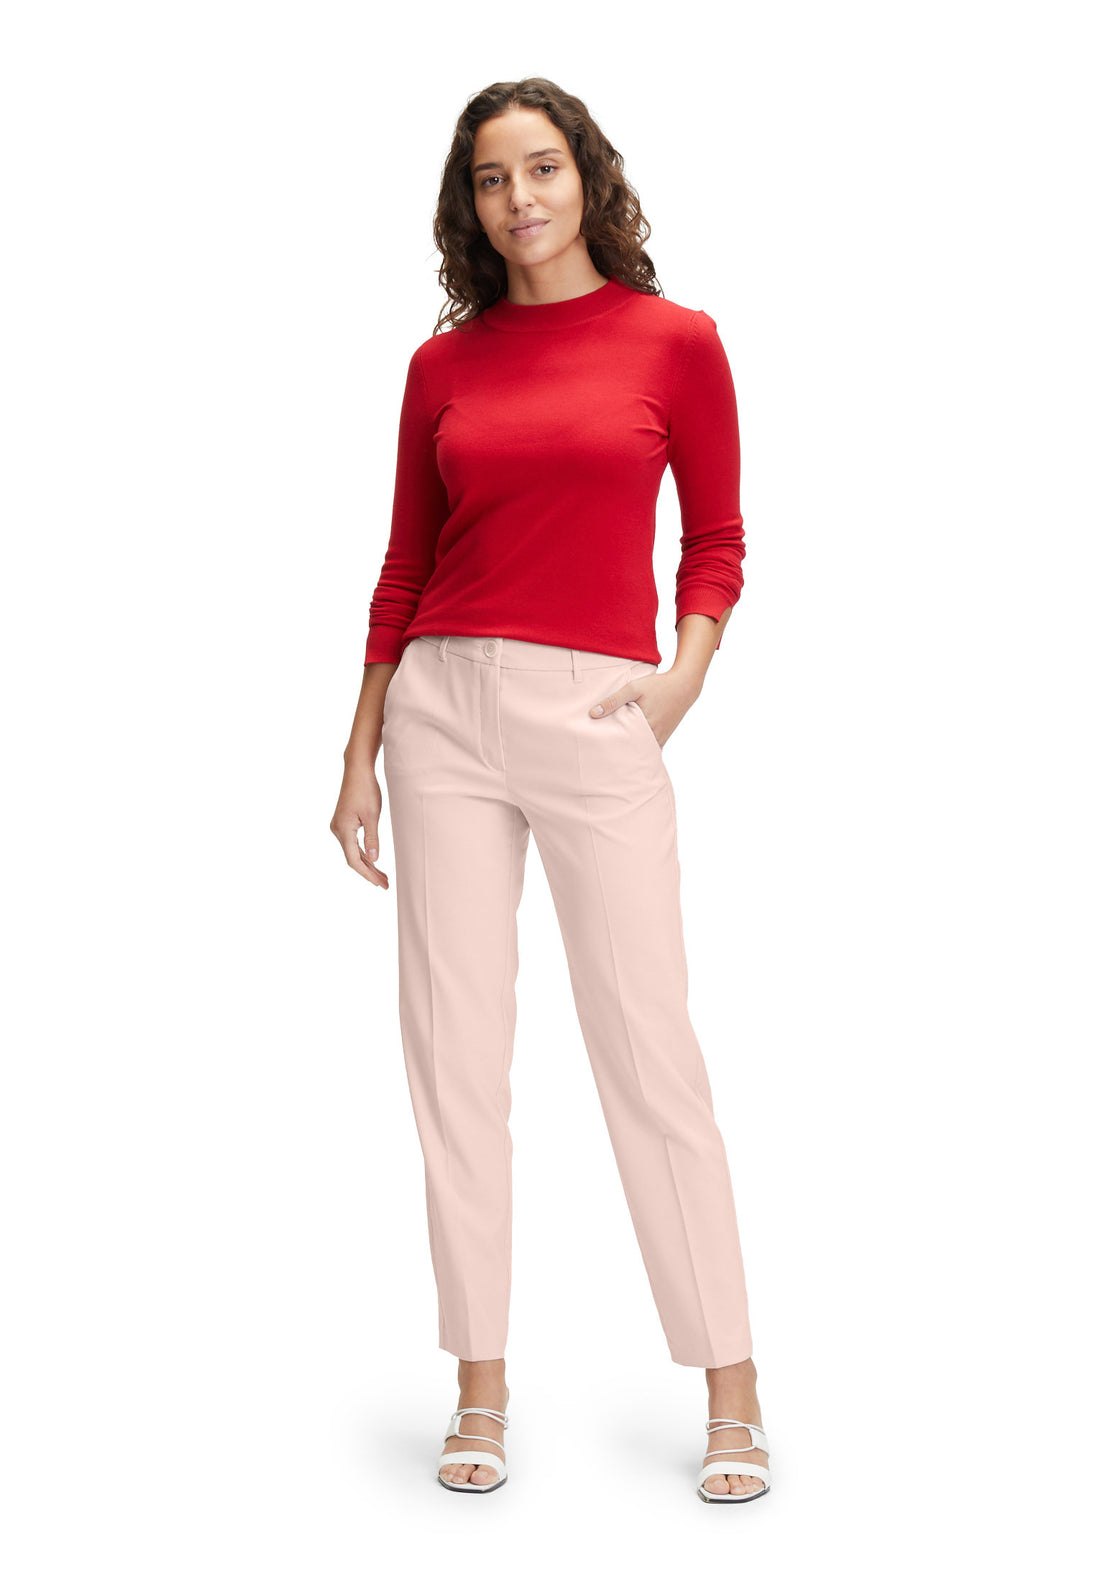 Business Trousers
With Crease_6002-1080_6055_01